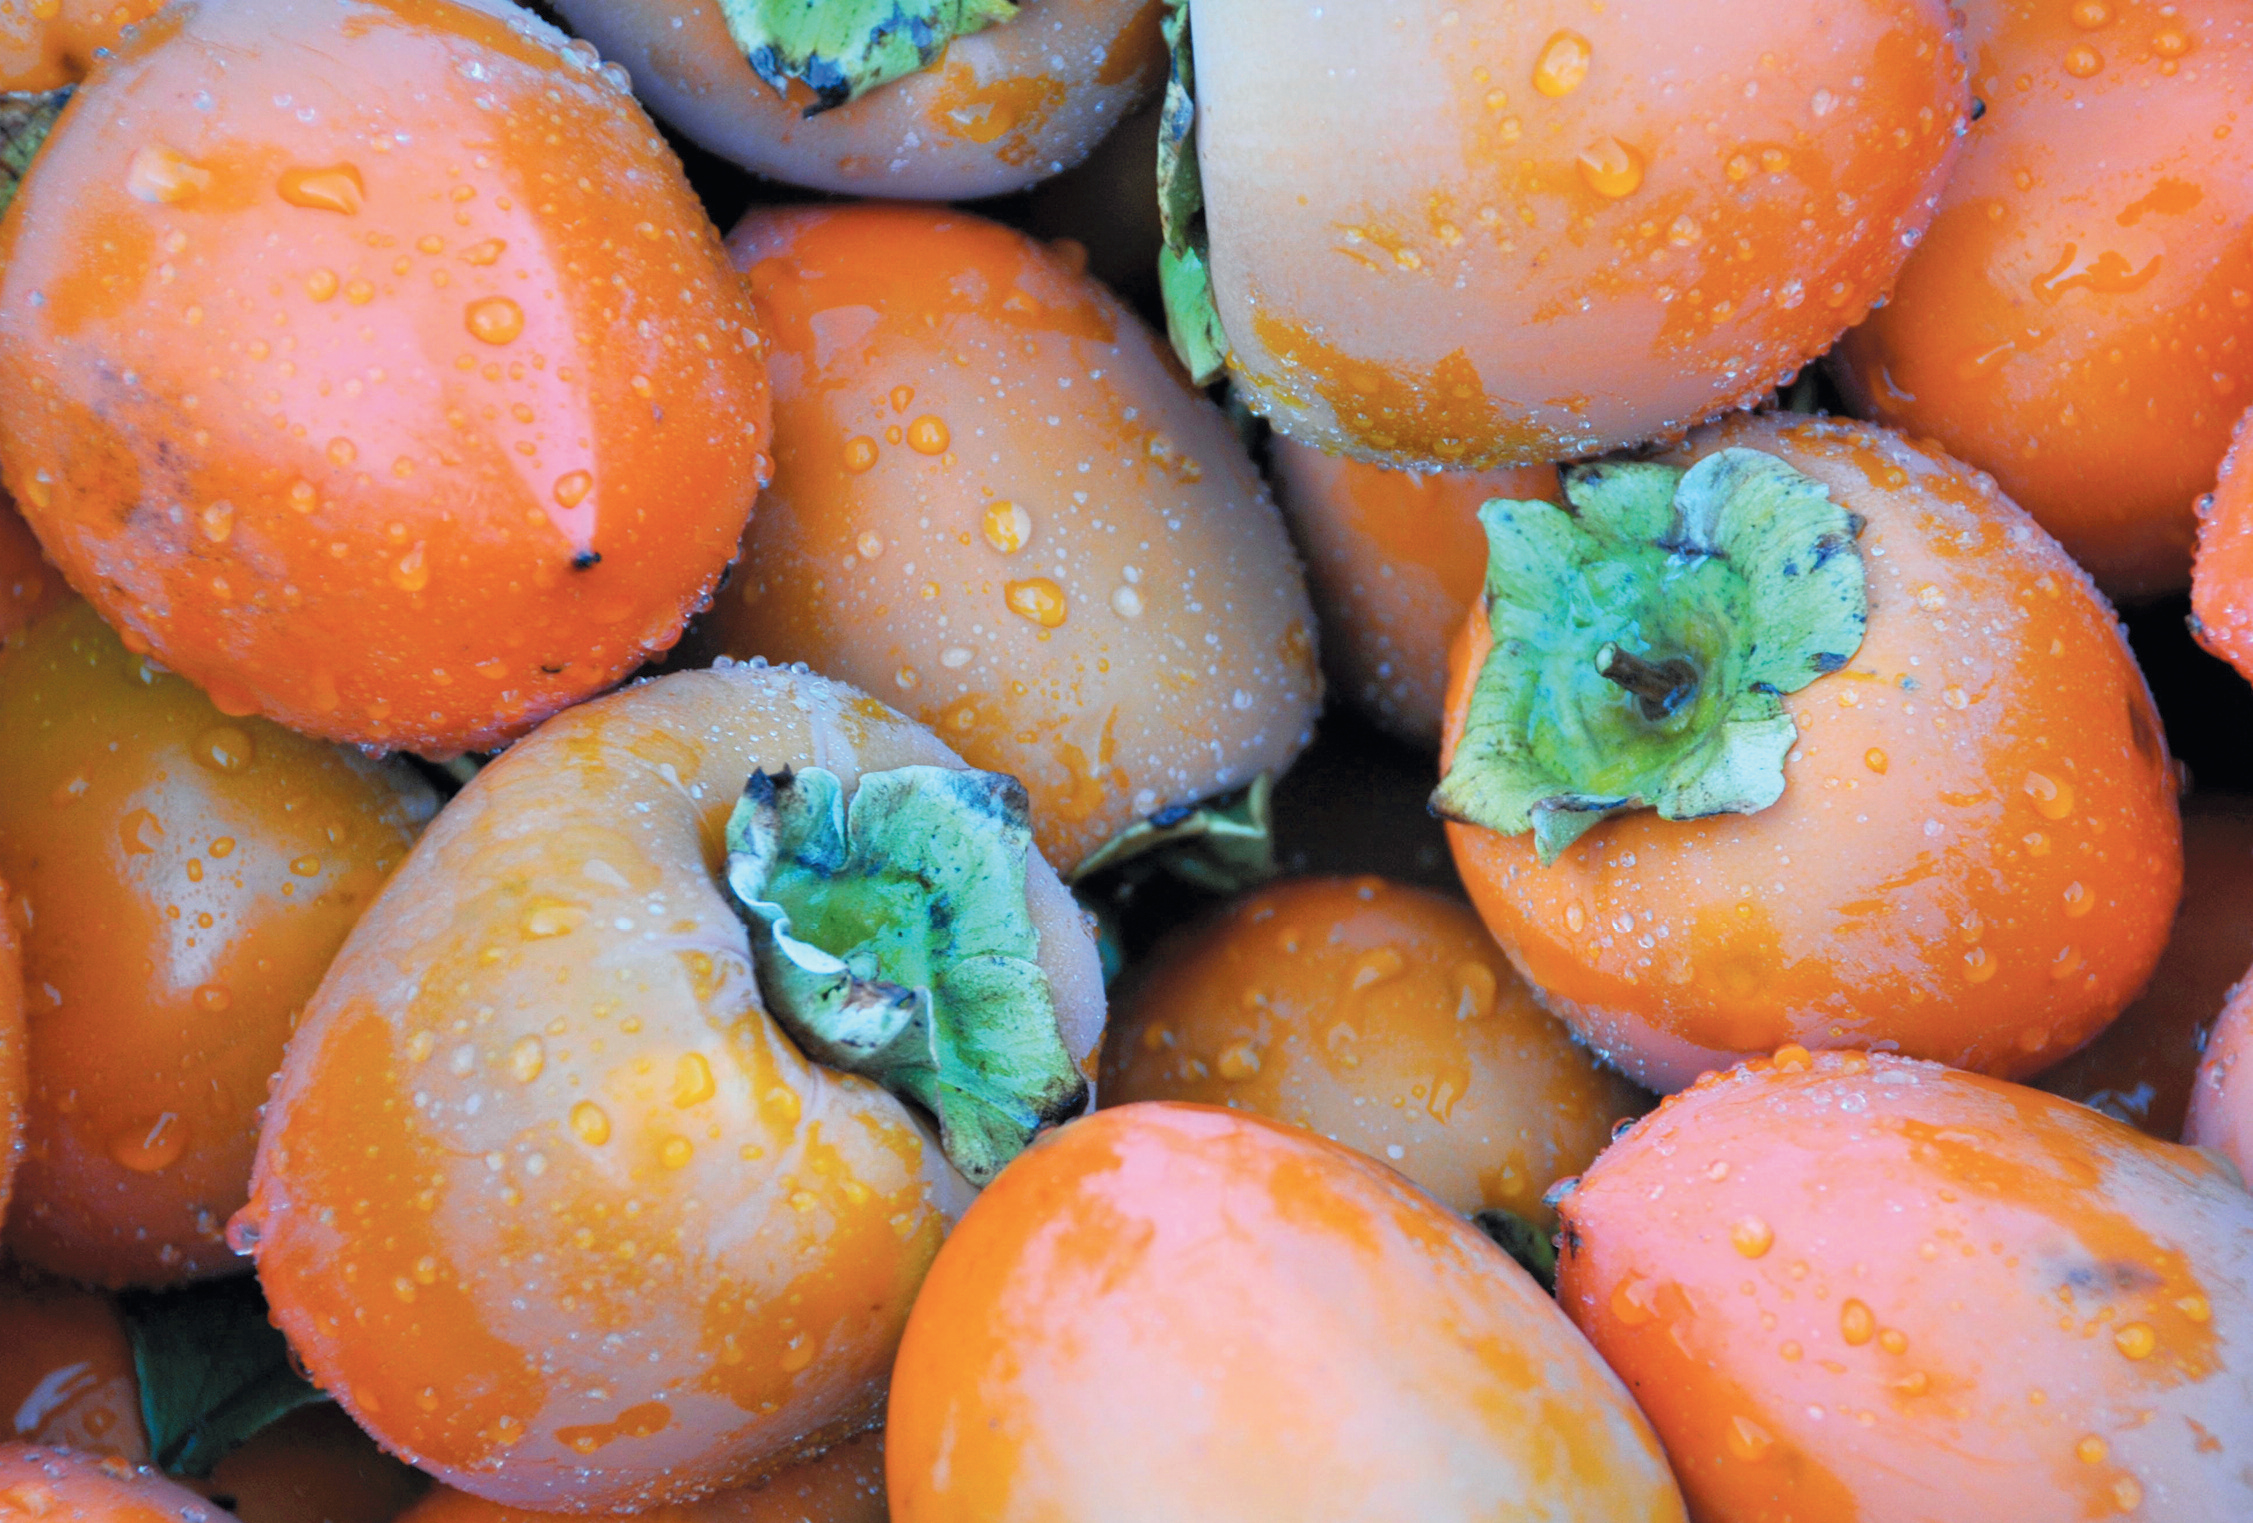 All About Persimmons and Persimmon Varieties